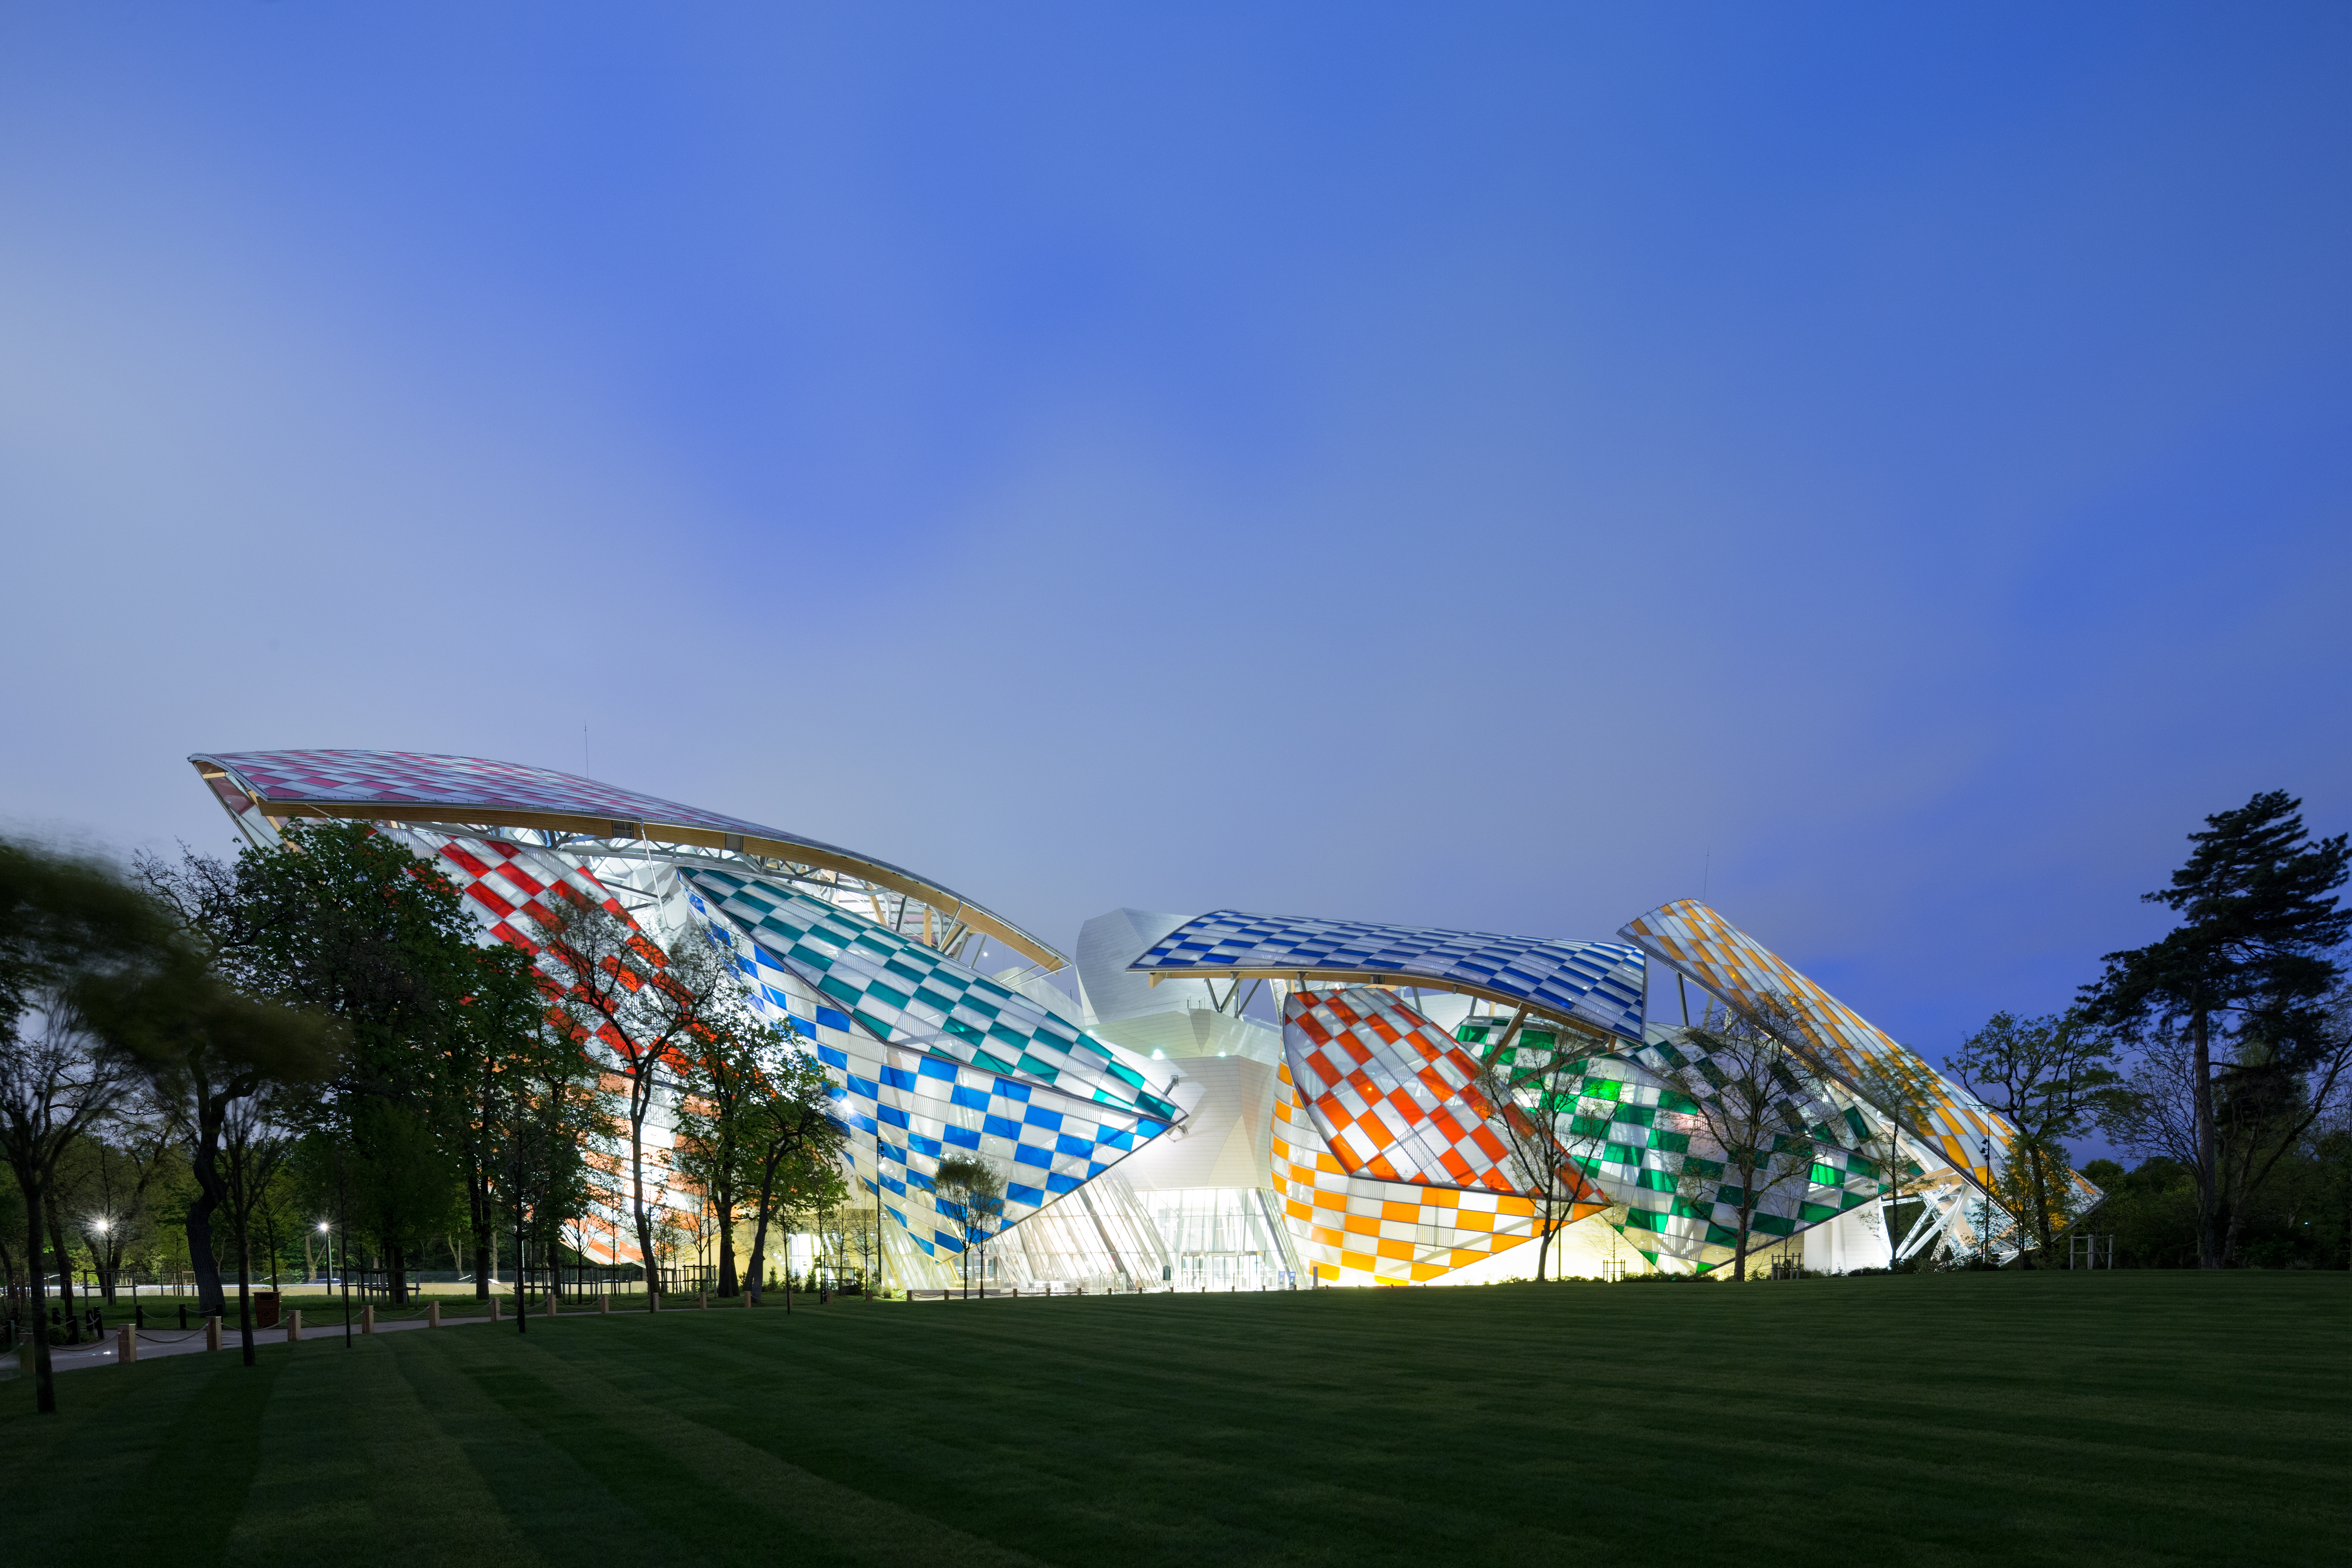 The Observatory of Light at the Fondation Louis Vuitton - www.waldenwongart.com